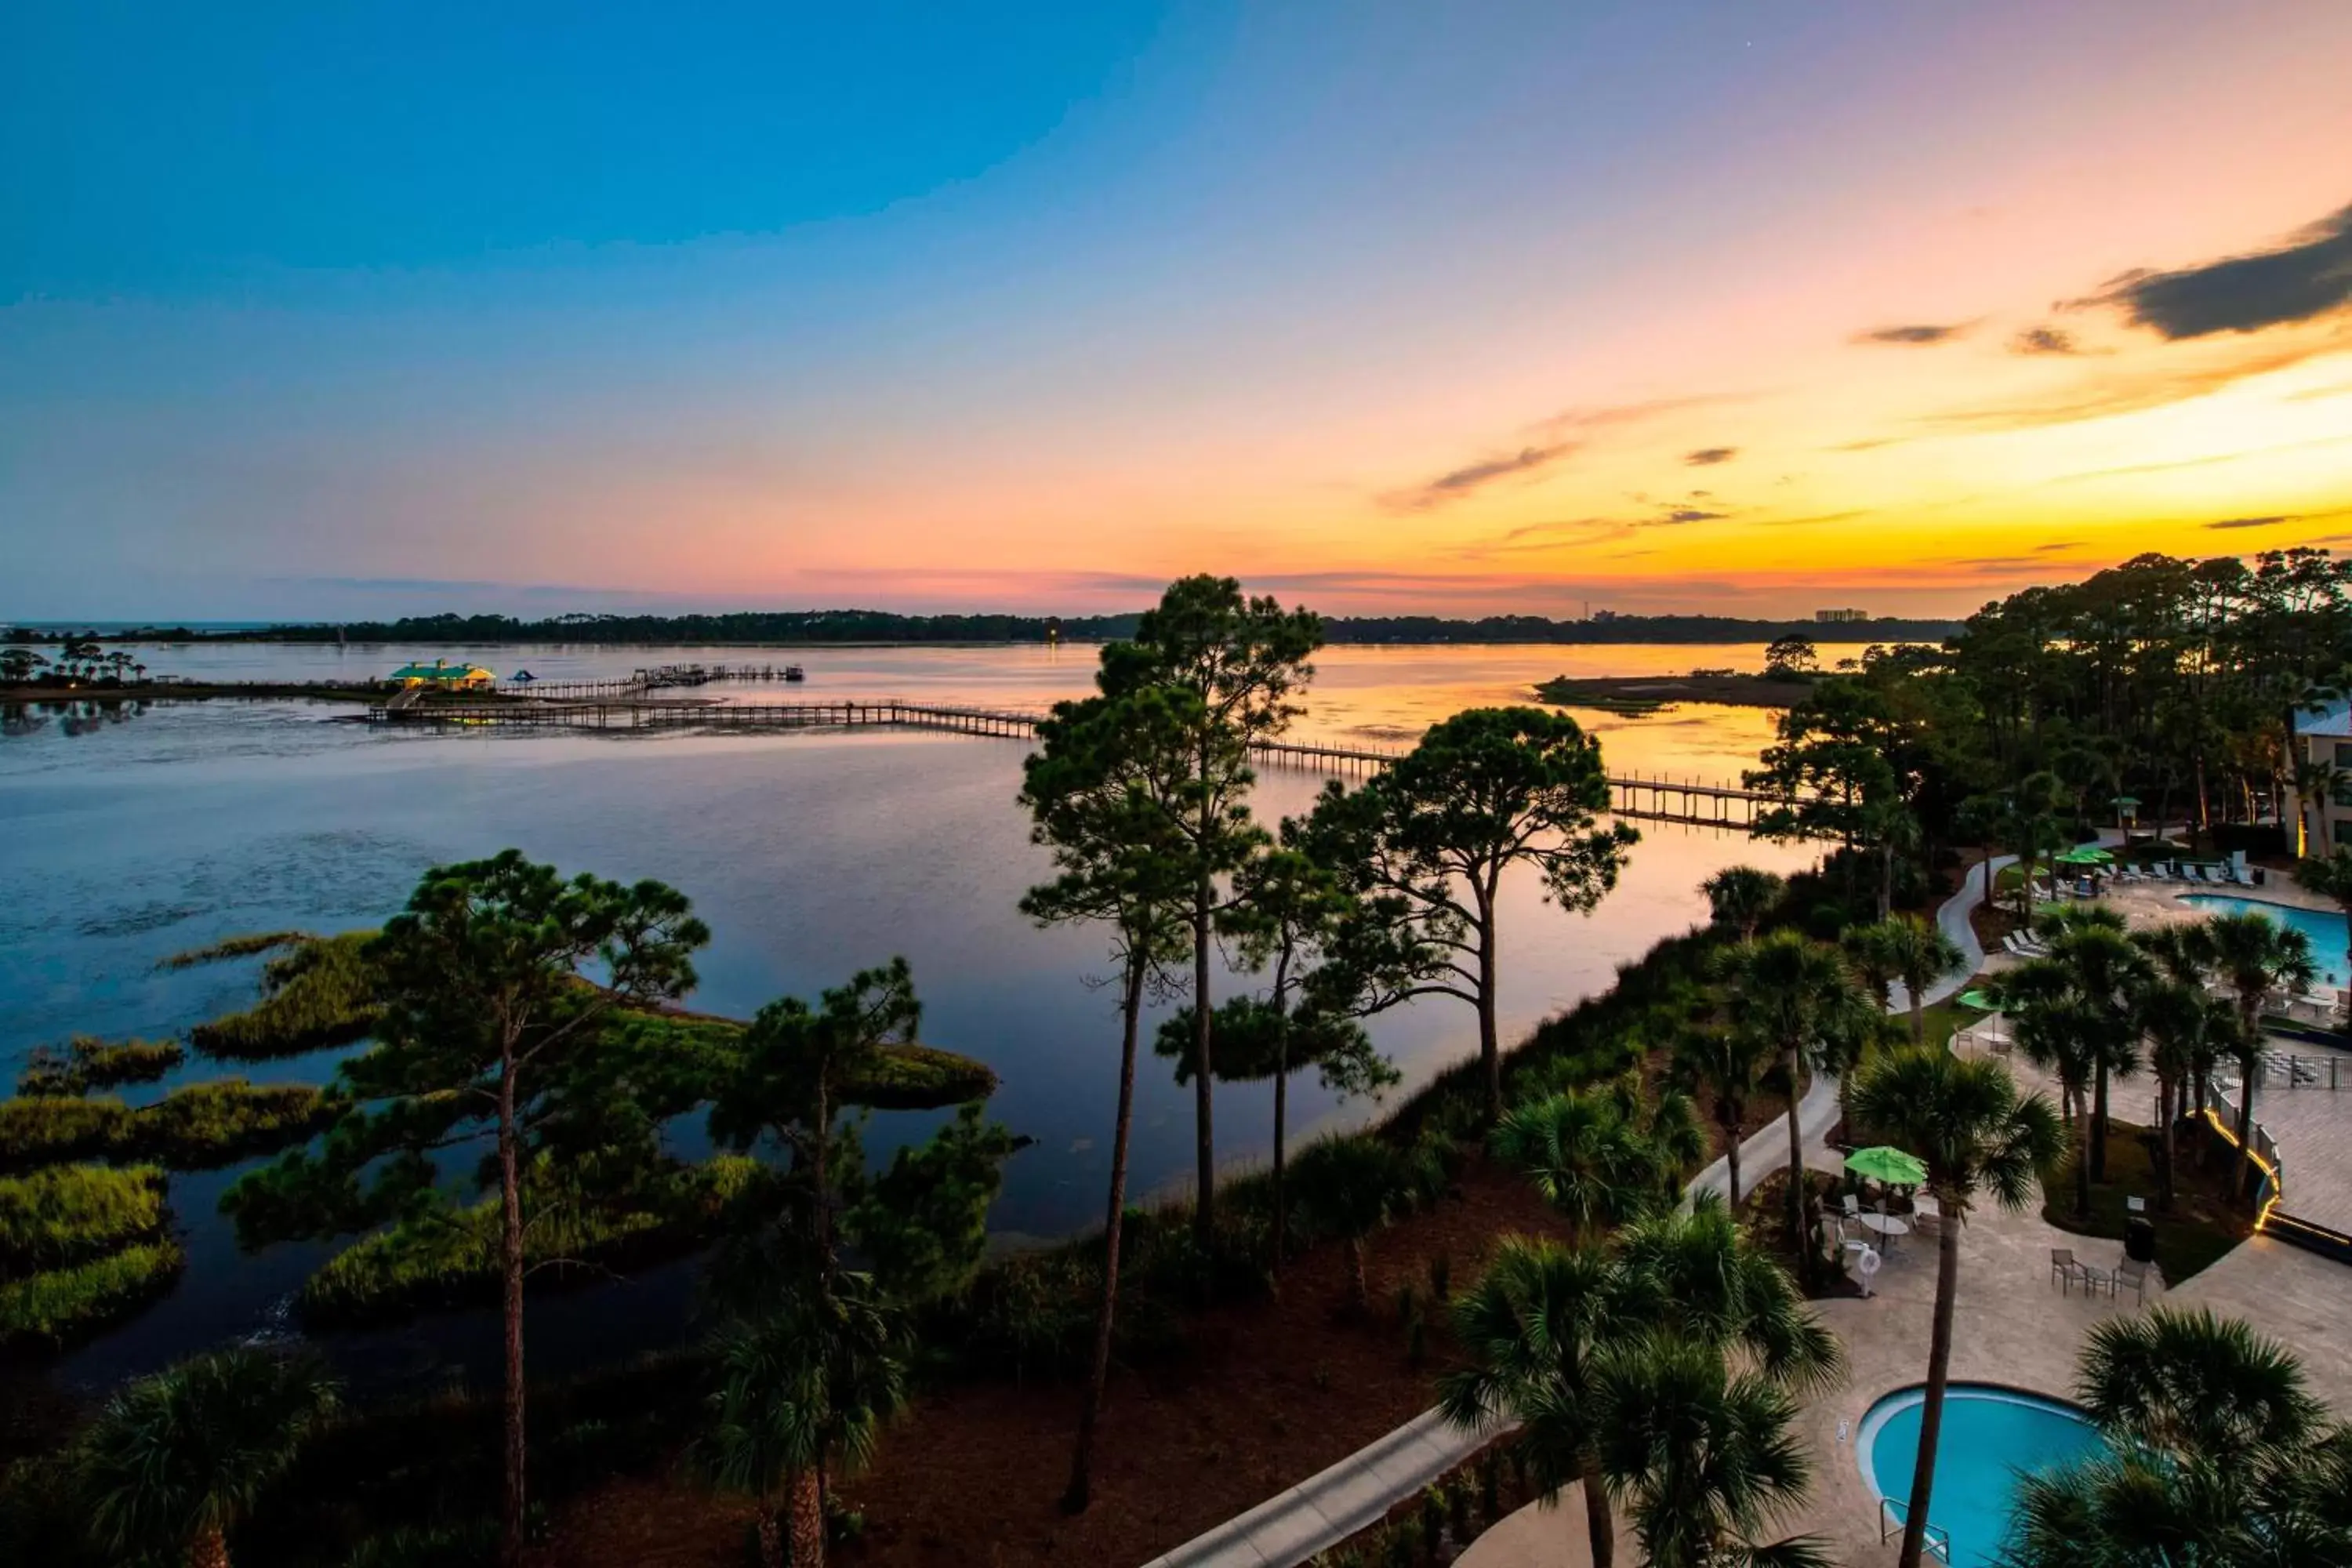 Natural landscape, Pool View in Bluegreen's Bayside Resort and Spa at Panama City Beach